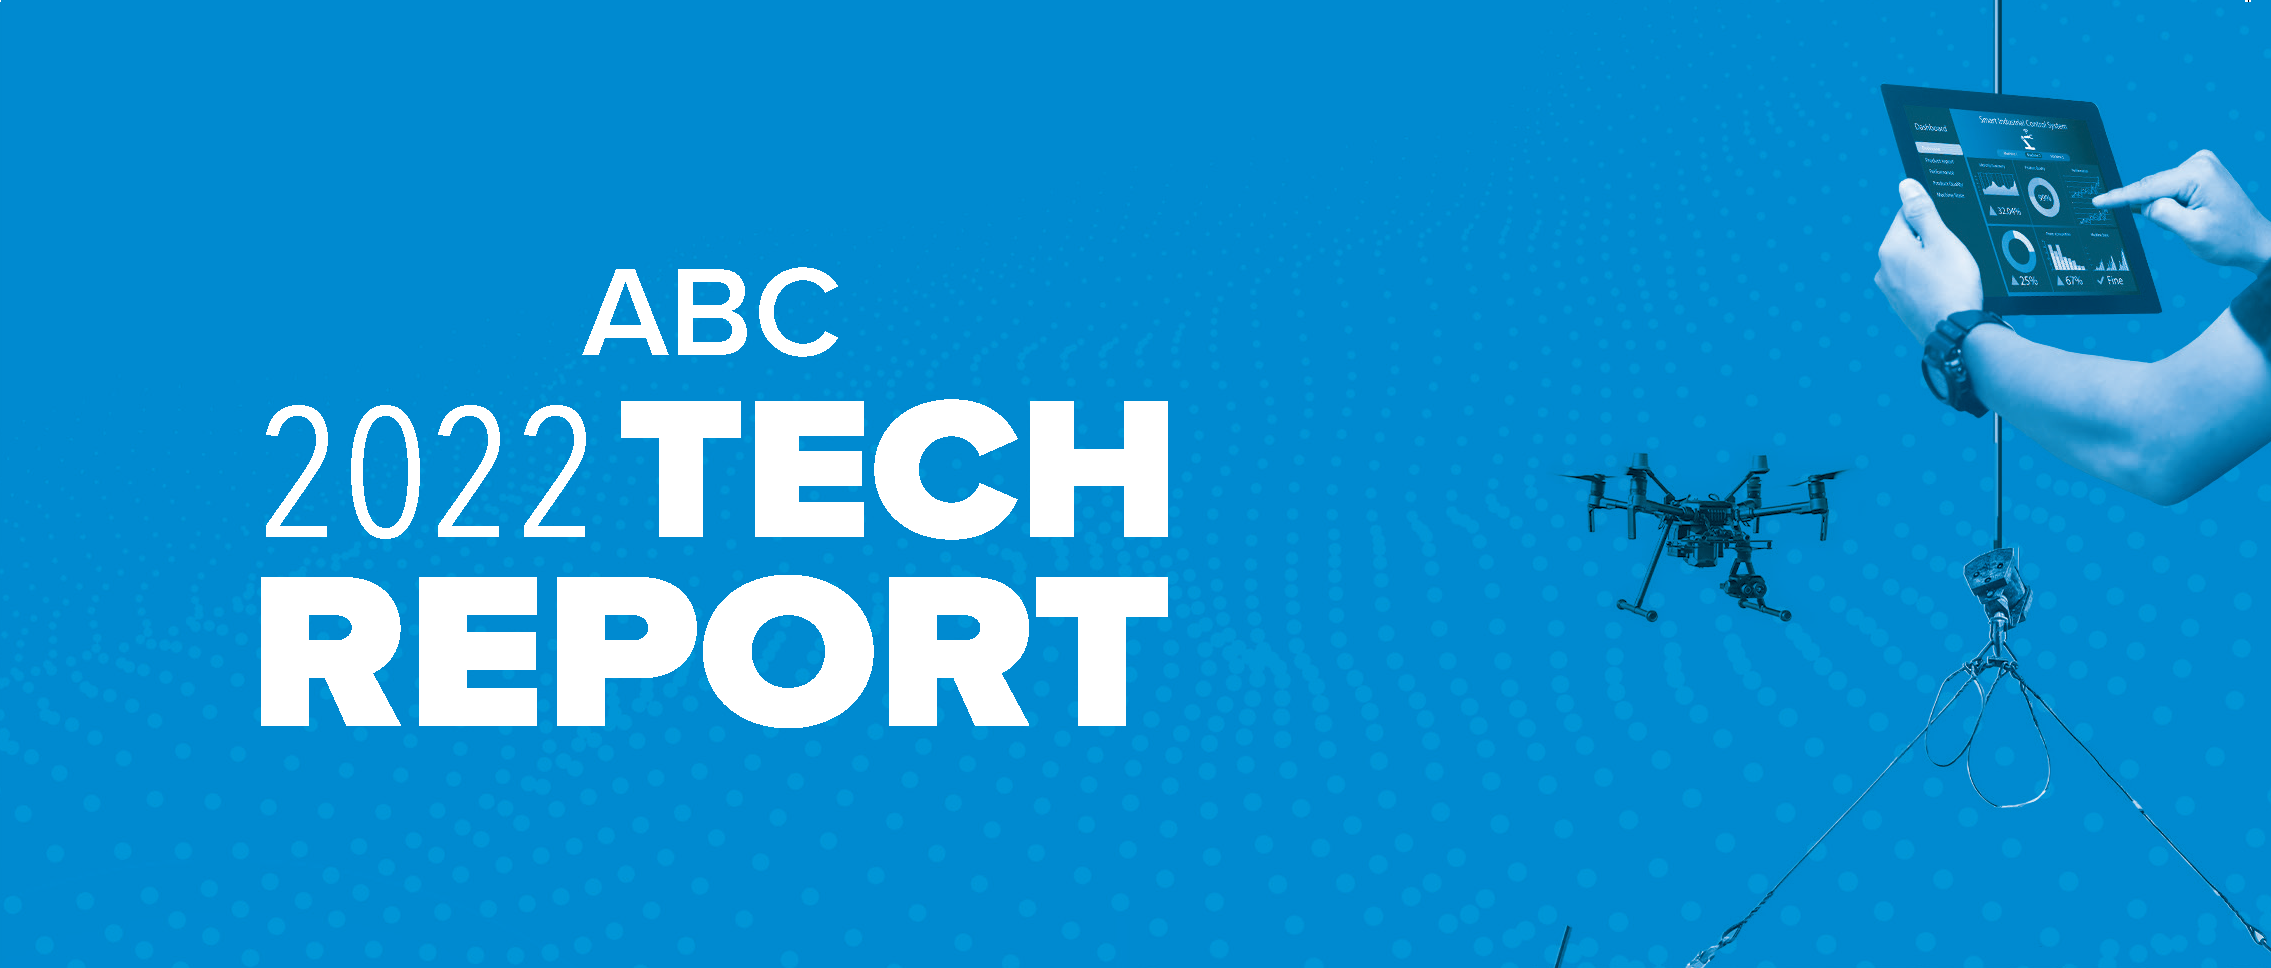 ABC’s 2022 Tech Report Features Real-World Journeys in Construction Innovation